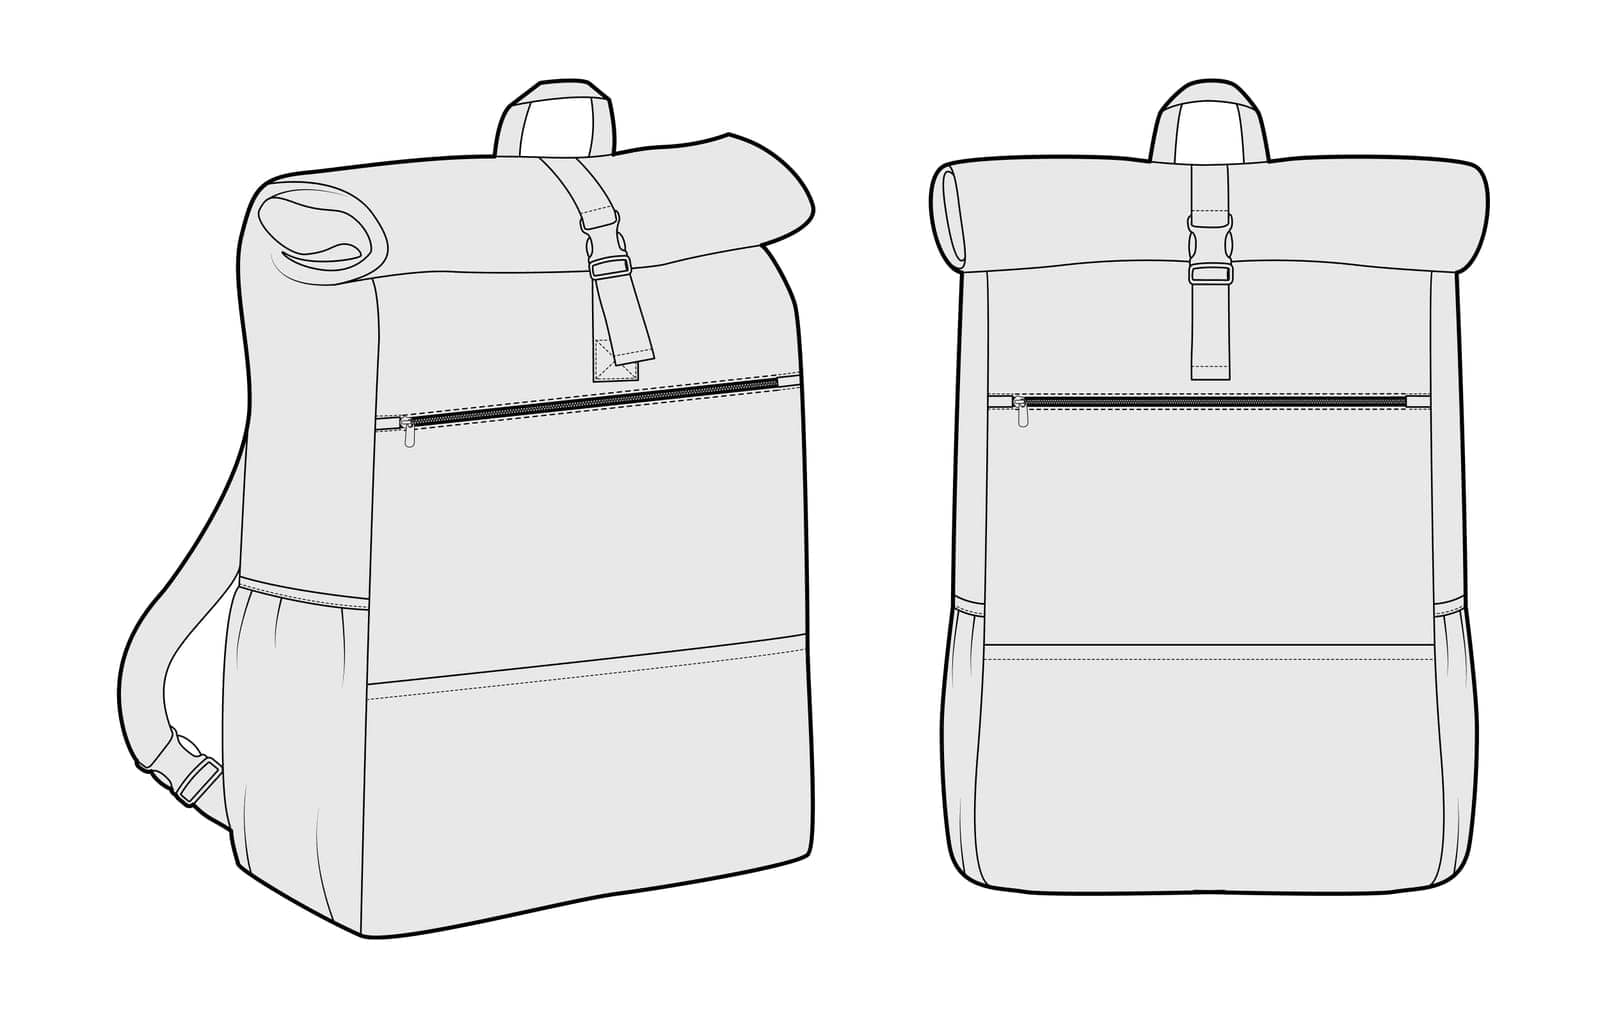 Everyday Expandable backpack silhouette bag. Fashion accessory technical illustration. Vector schoolbag front 3-4 view by Vectoressa